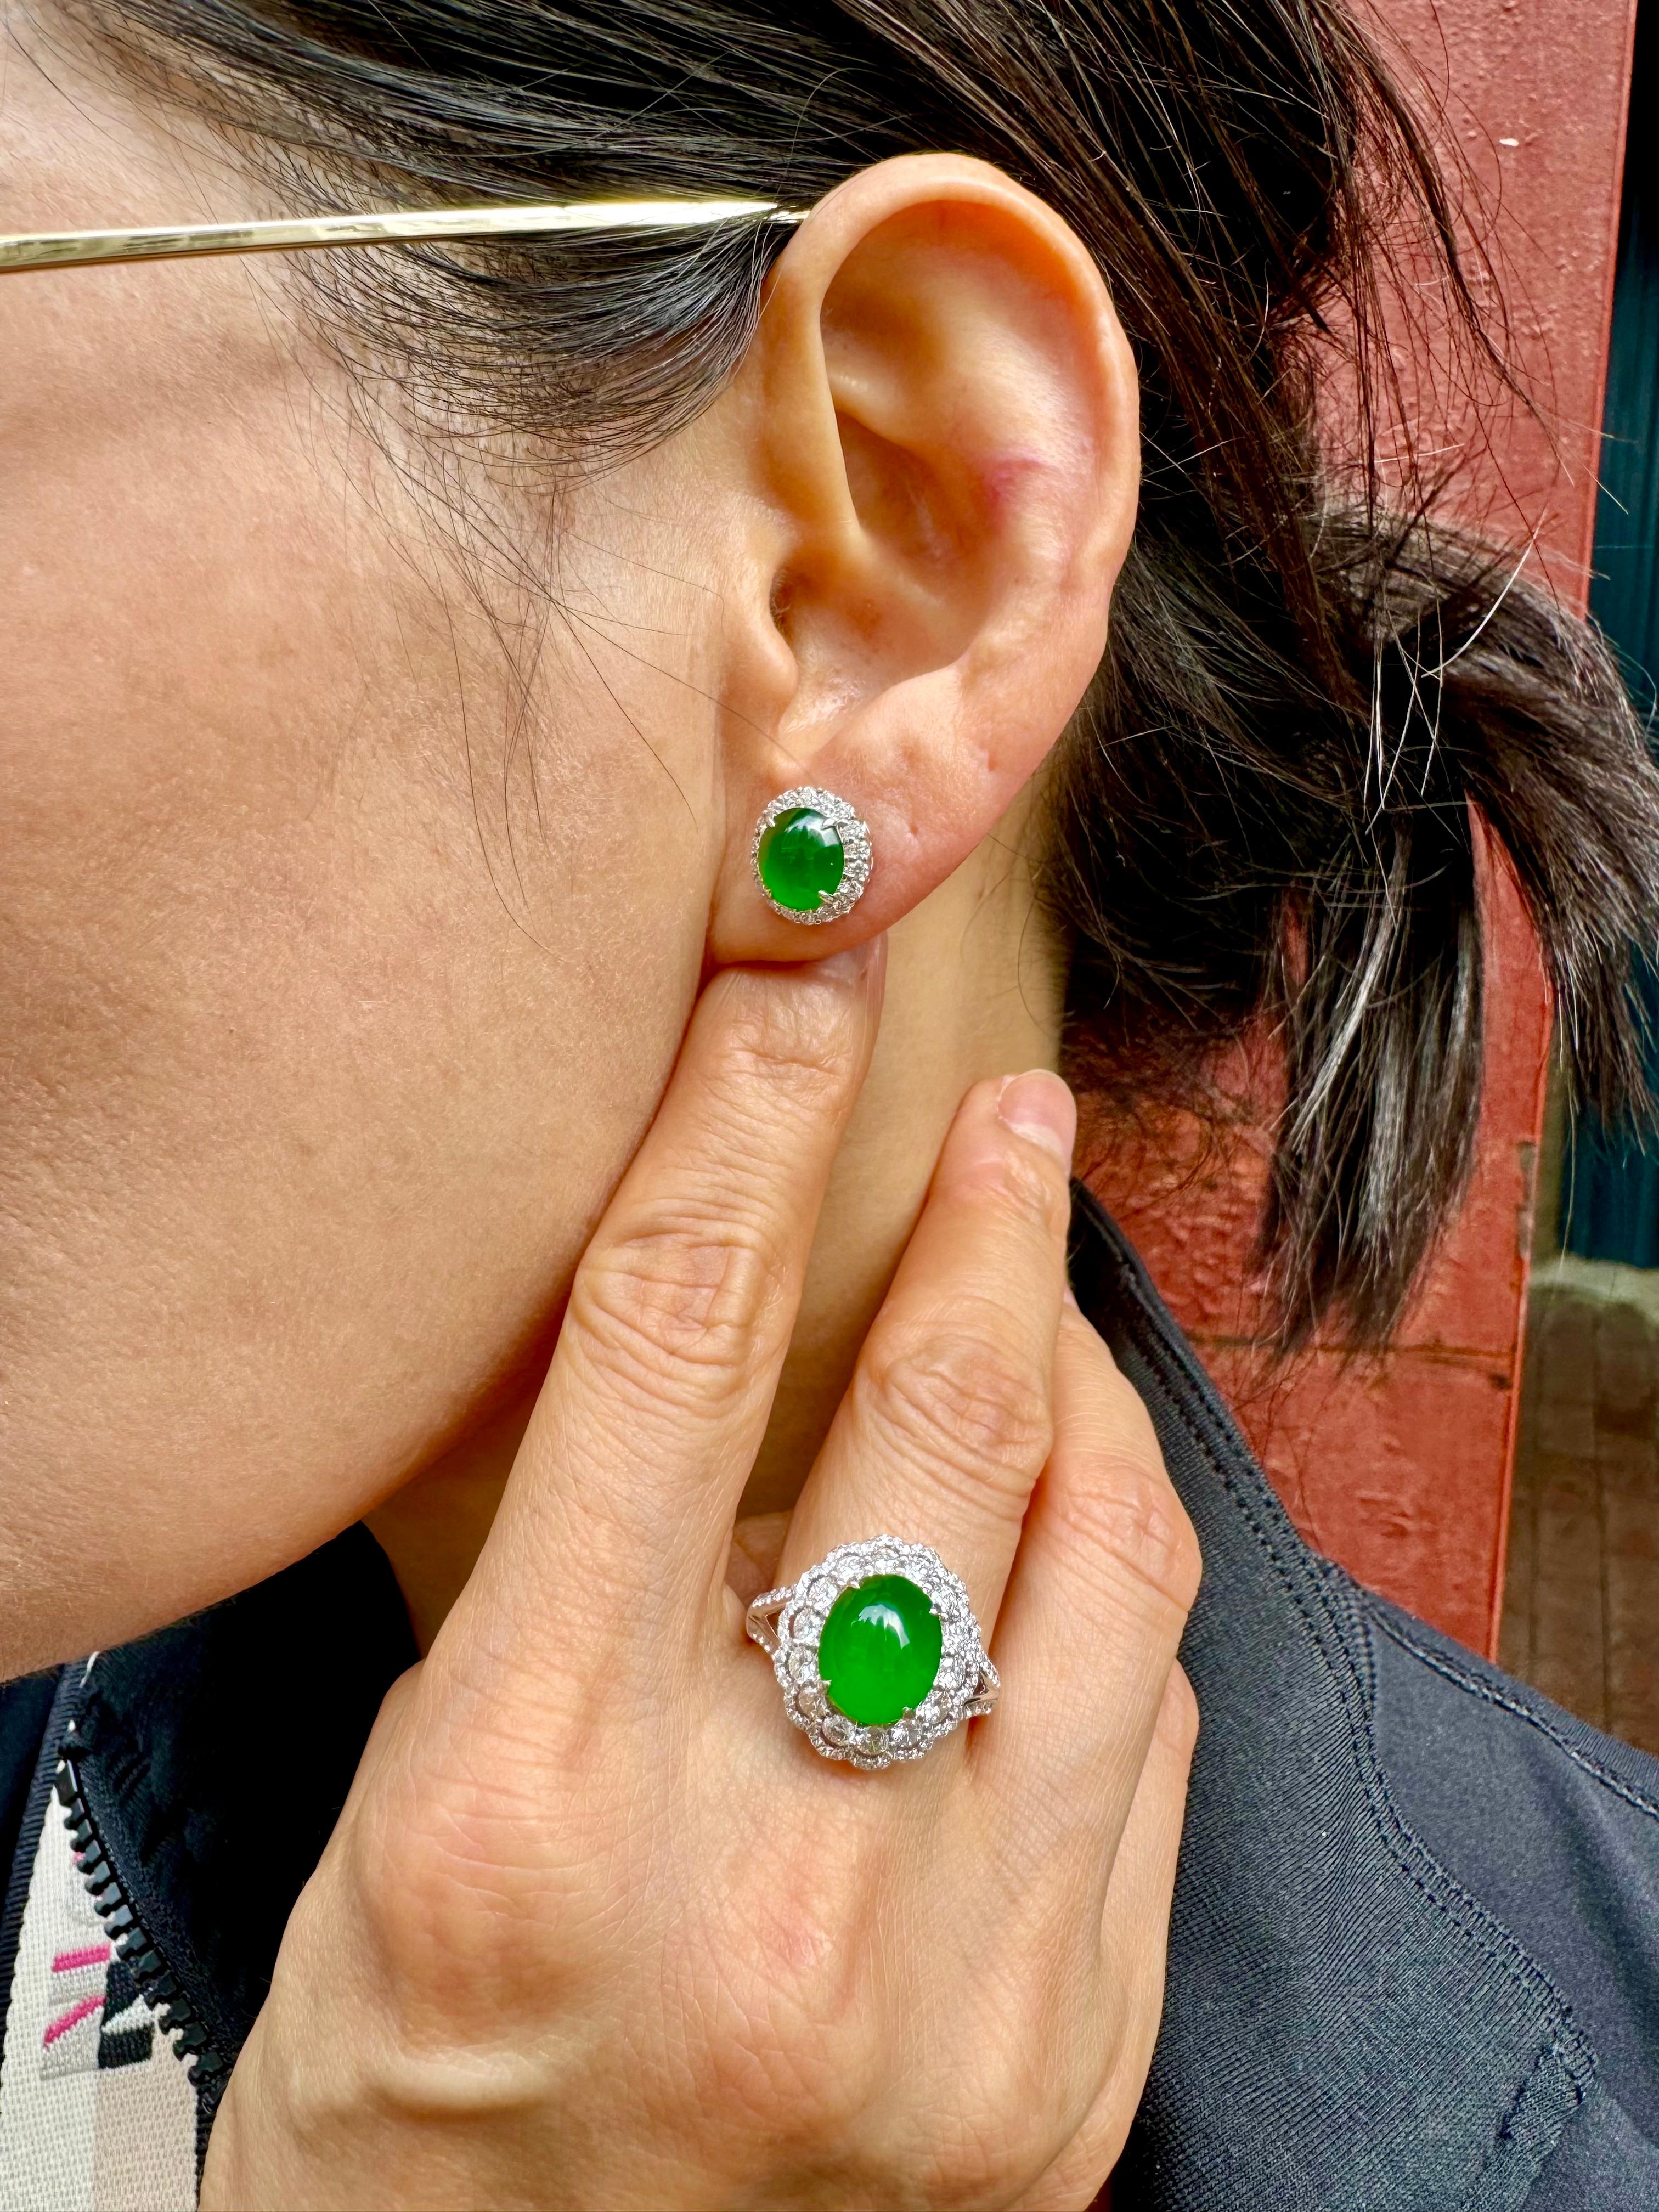 Please check out the HD video! It doesn't get much better than this! This is sold as a SET. In the set is a pair of stud earrings and a matching cocktail ring. The imperial green Jadeite Jade earrings has the best of the best glowing green color.